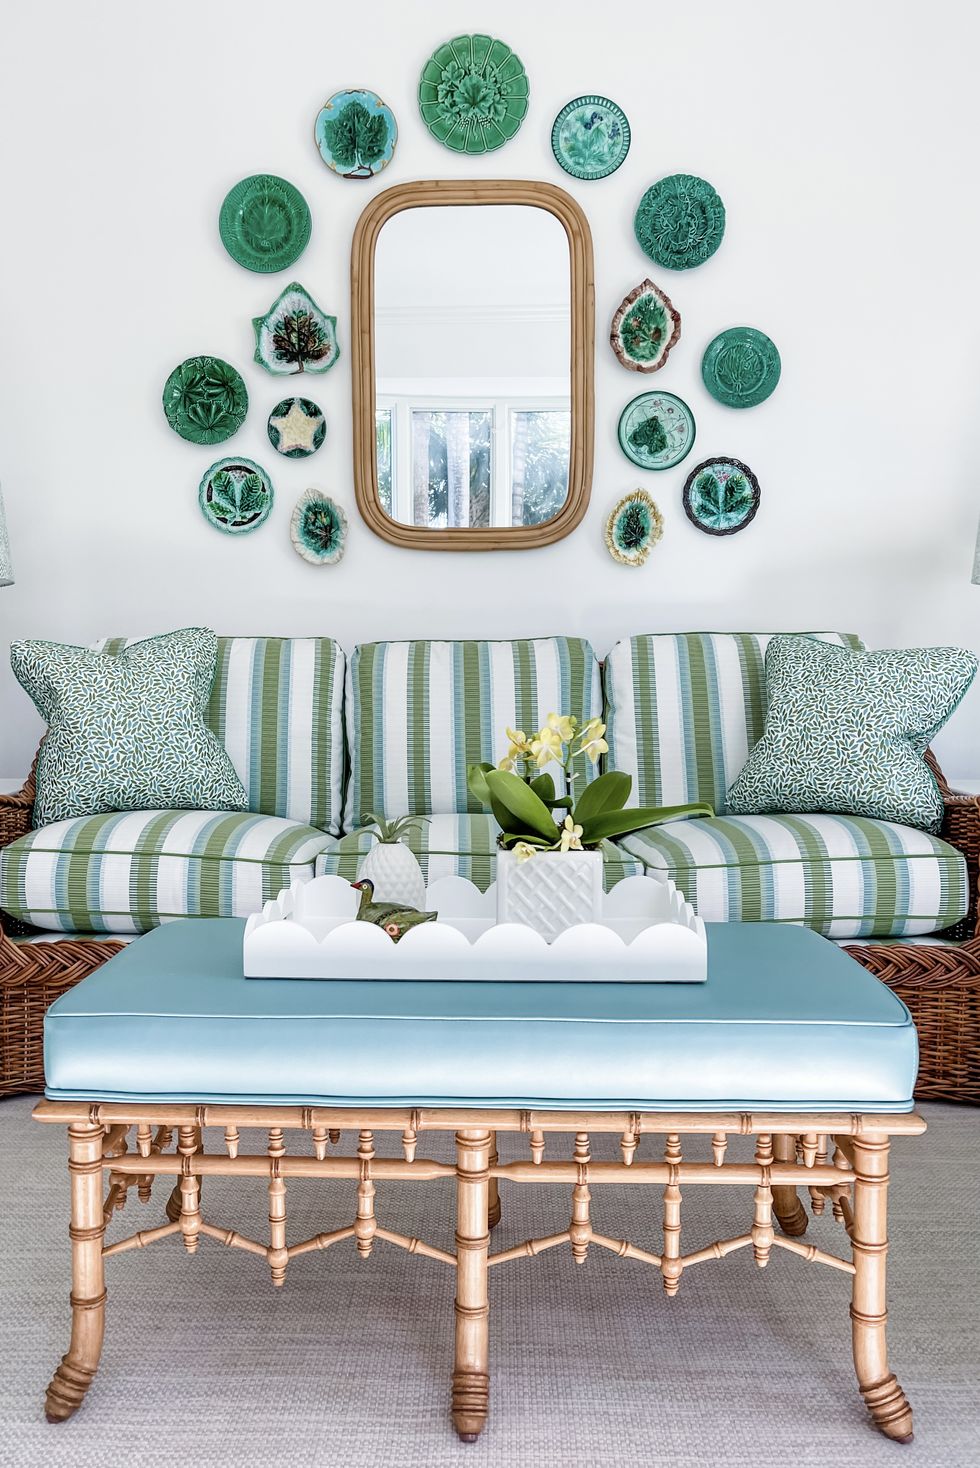 green and blue living room with wicker furniture